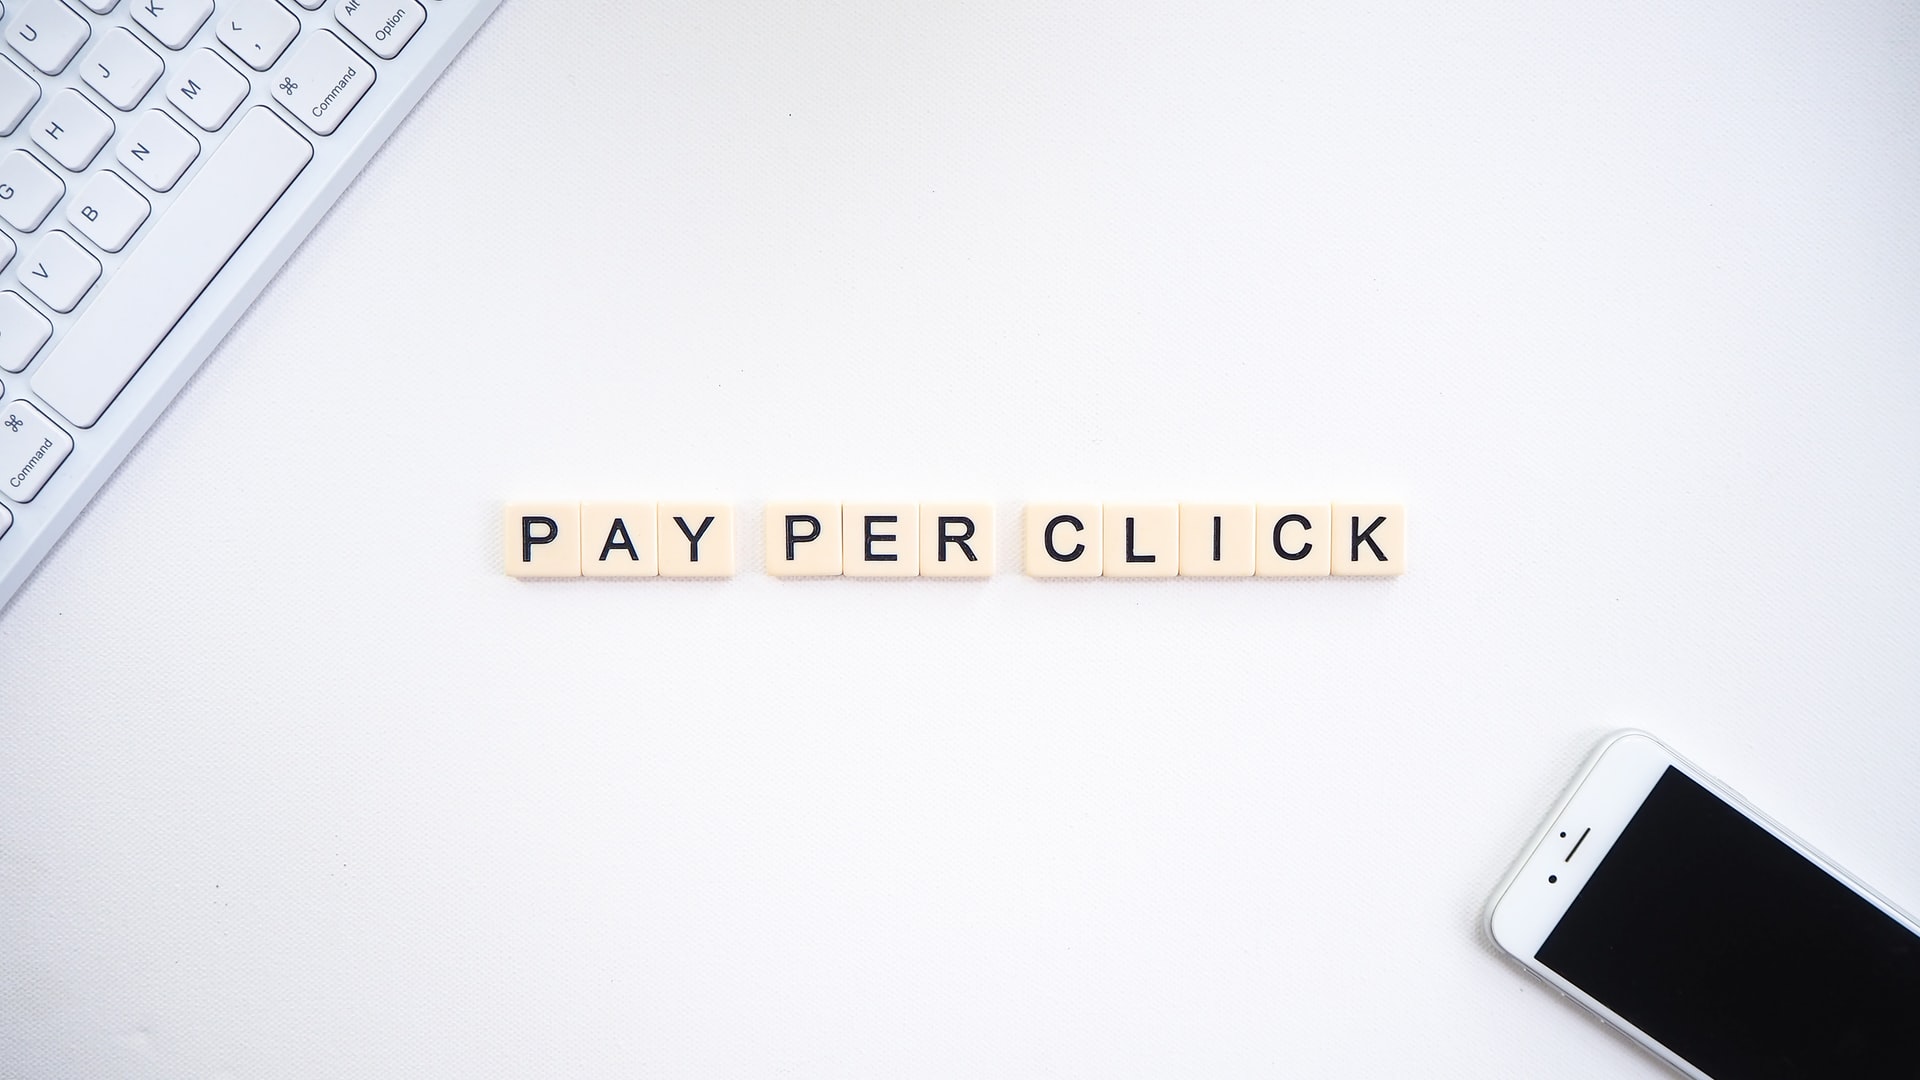 pay per click spelled in scrabble letters